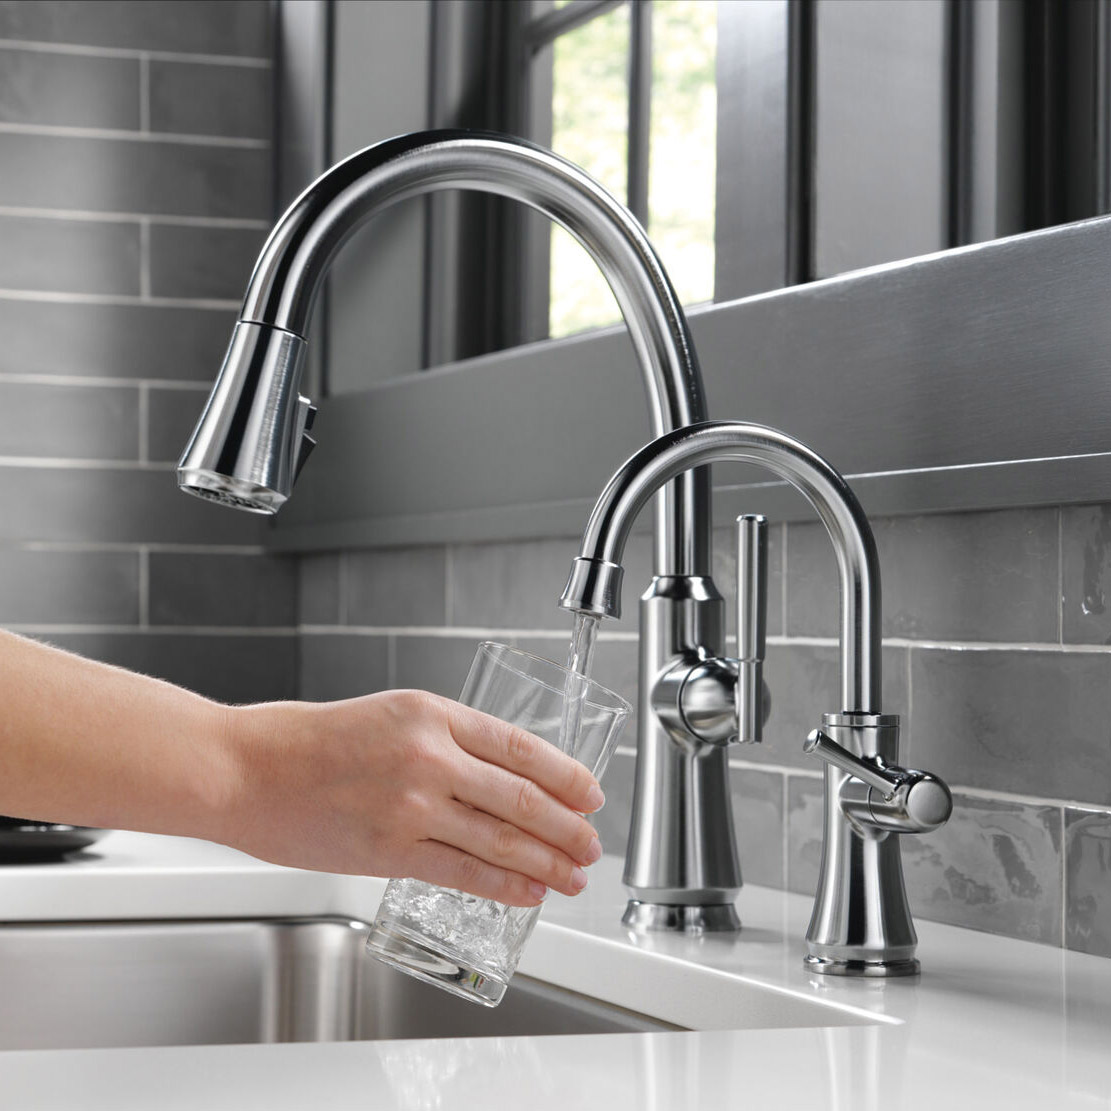 Water Faucet Home Home Filter Services